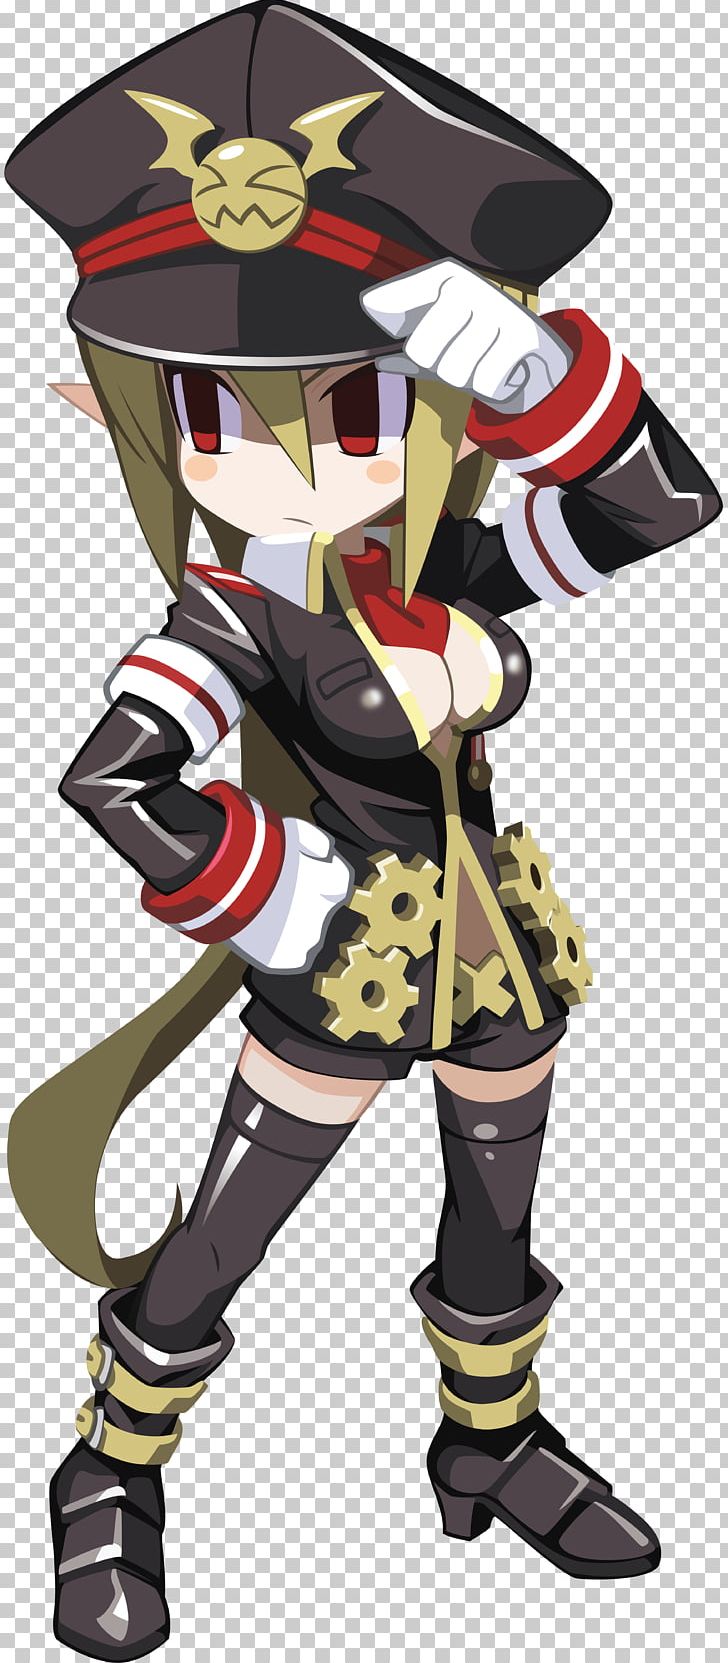 Disgaea 5 Disgaea 3 Disgaea 4 Disgaea: Hour Of Darkness Disgaea 2 PNG, Clipart, Anime, Armour, Art, Costume, Deviantart Free PNG Download